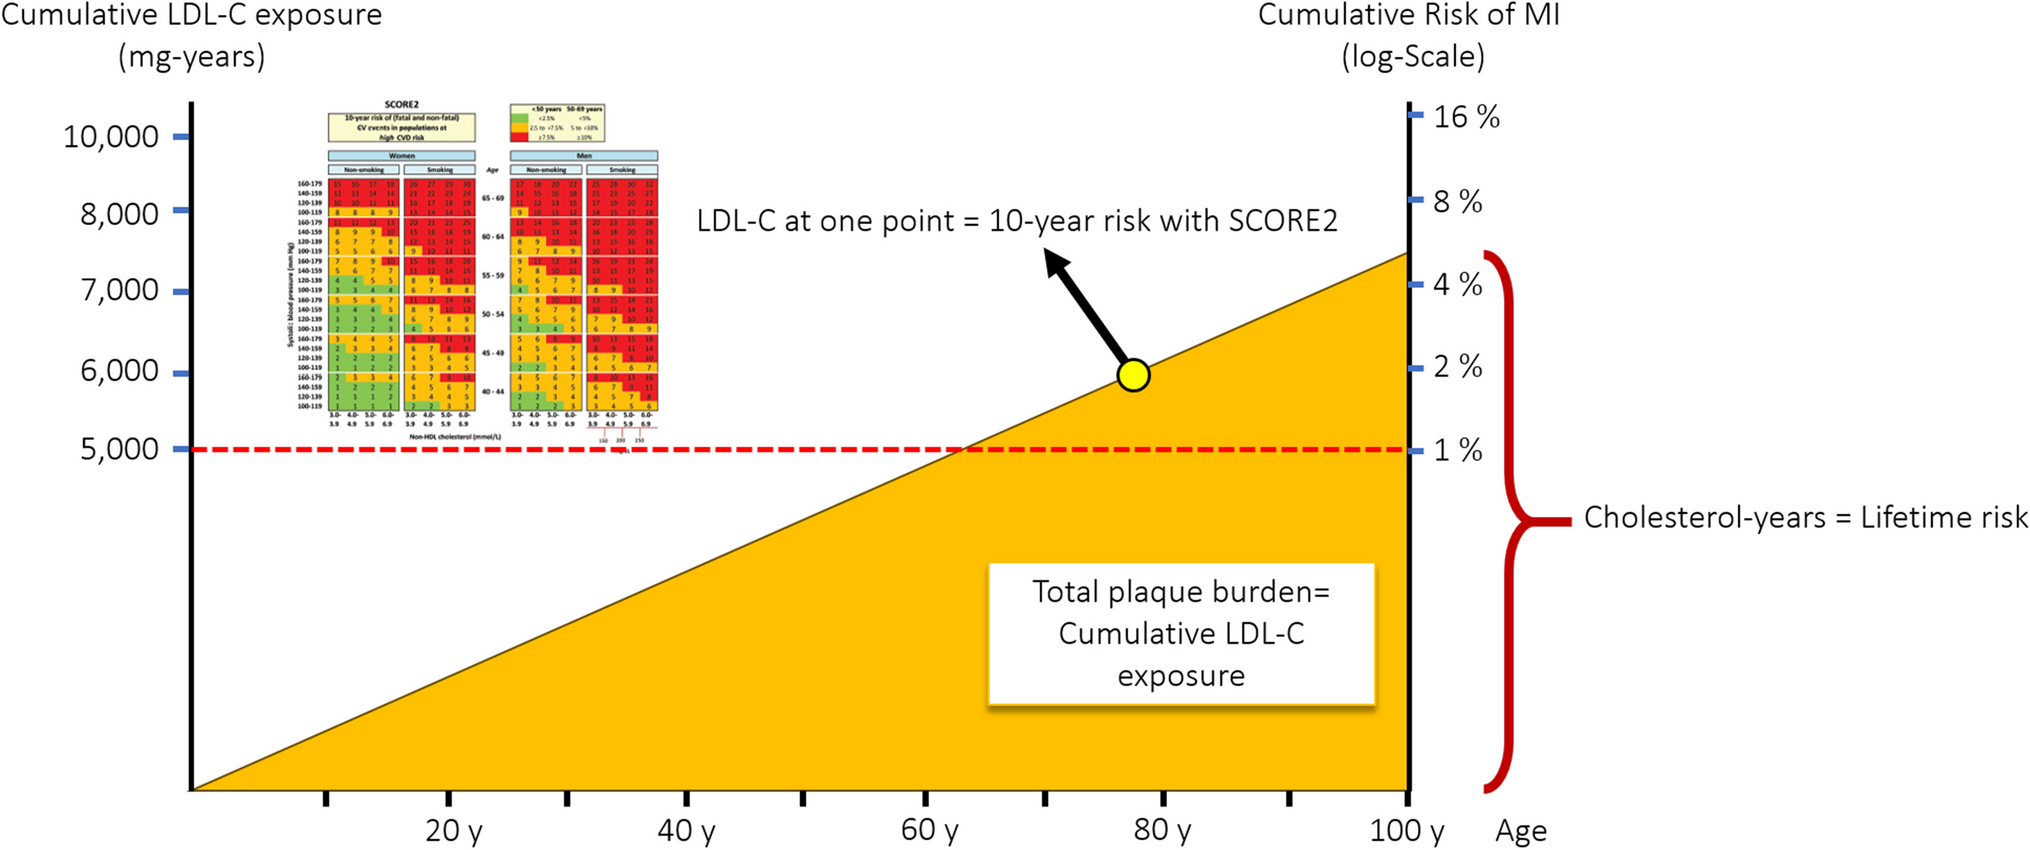 European Lipid Guidelines and Cardiovascular Risk Estimation: Current Status and Future Challenges